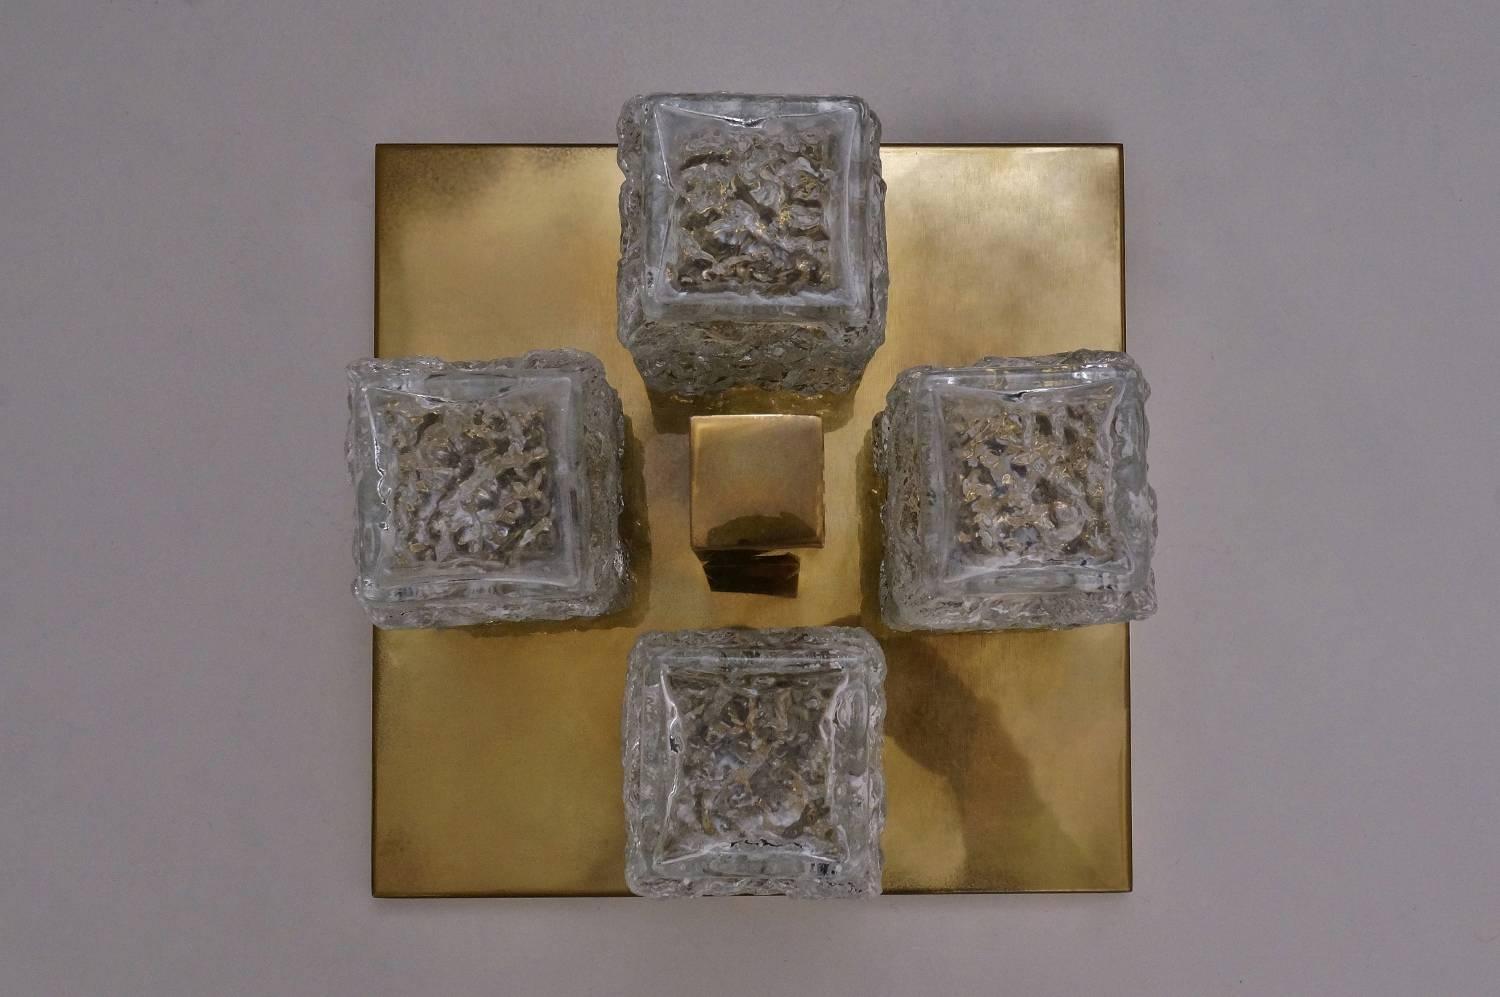 Kalmar ceiling light in the Brutalist style, glass and brass by J.T.Kalmar, circa 1970s, Austrian.

This light has been thoroughly cleaned respecting the vintage patina. It has been newly rewired, earthed, in full working order and ready to install.